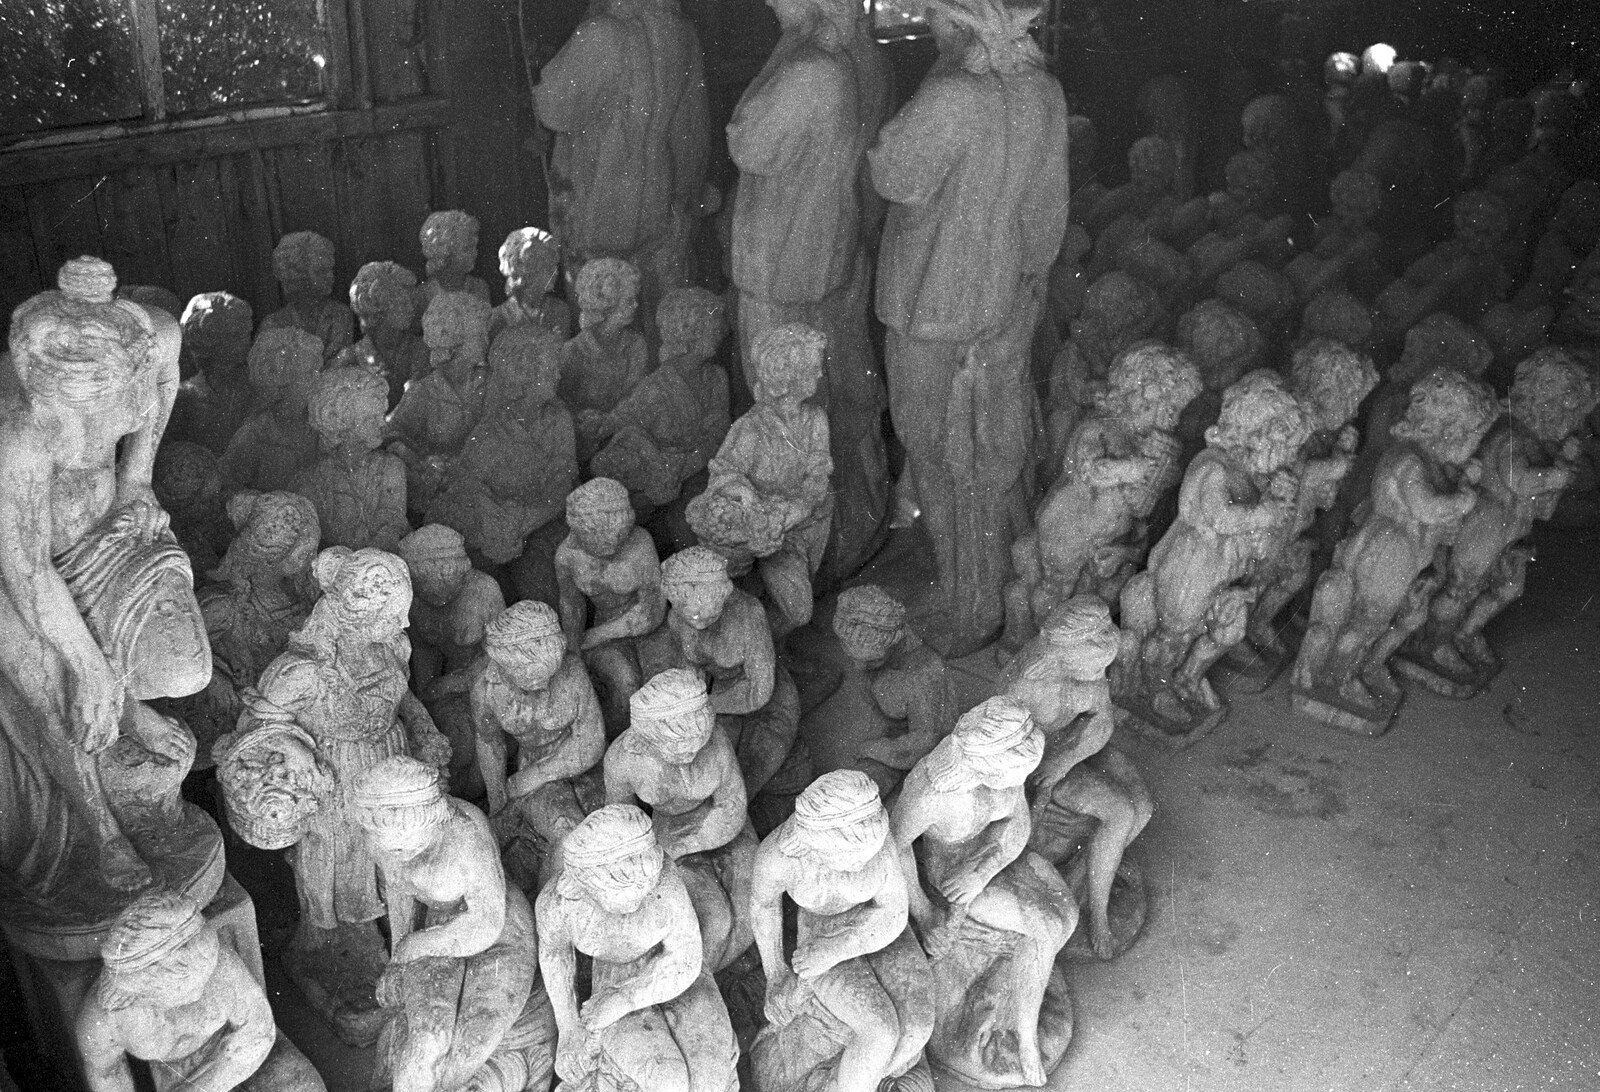 A concrete version of the Teracotta Army from A Black and White Life in Concrete, Stuston, Suffolk - 3rd September 1992